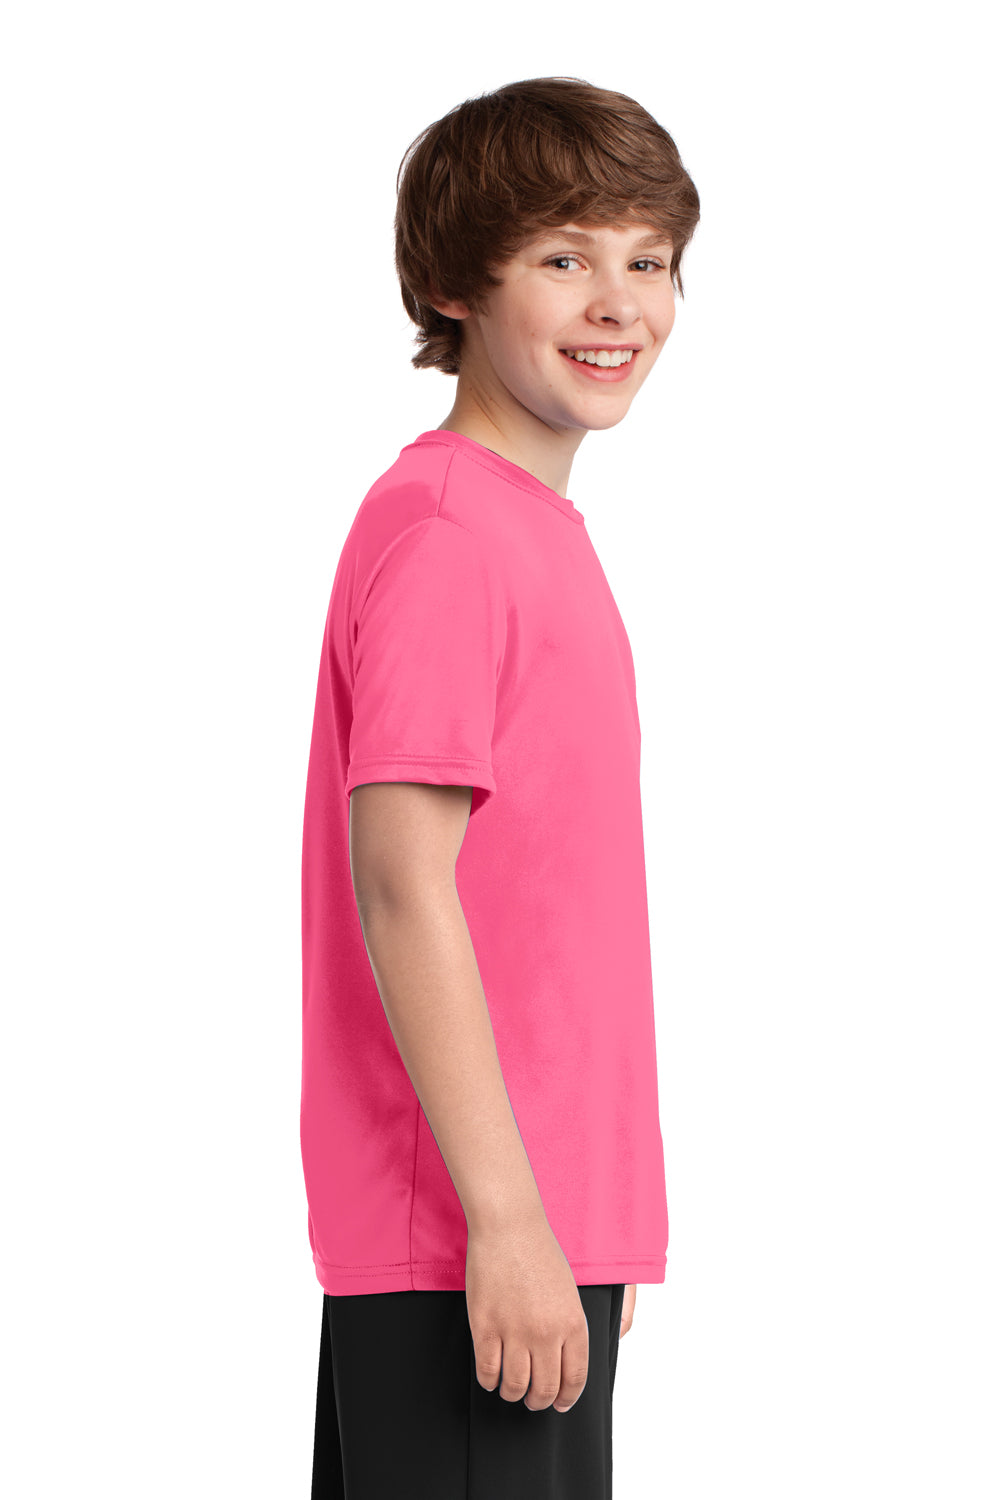 Port & Company PC380Y Youth Dry Zone Performance Moisture Wicking Short Sleeve Crewneck T-Shirt Neon Pink Side